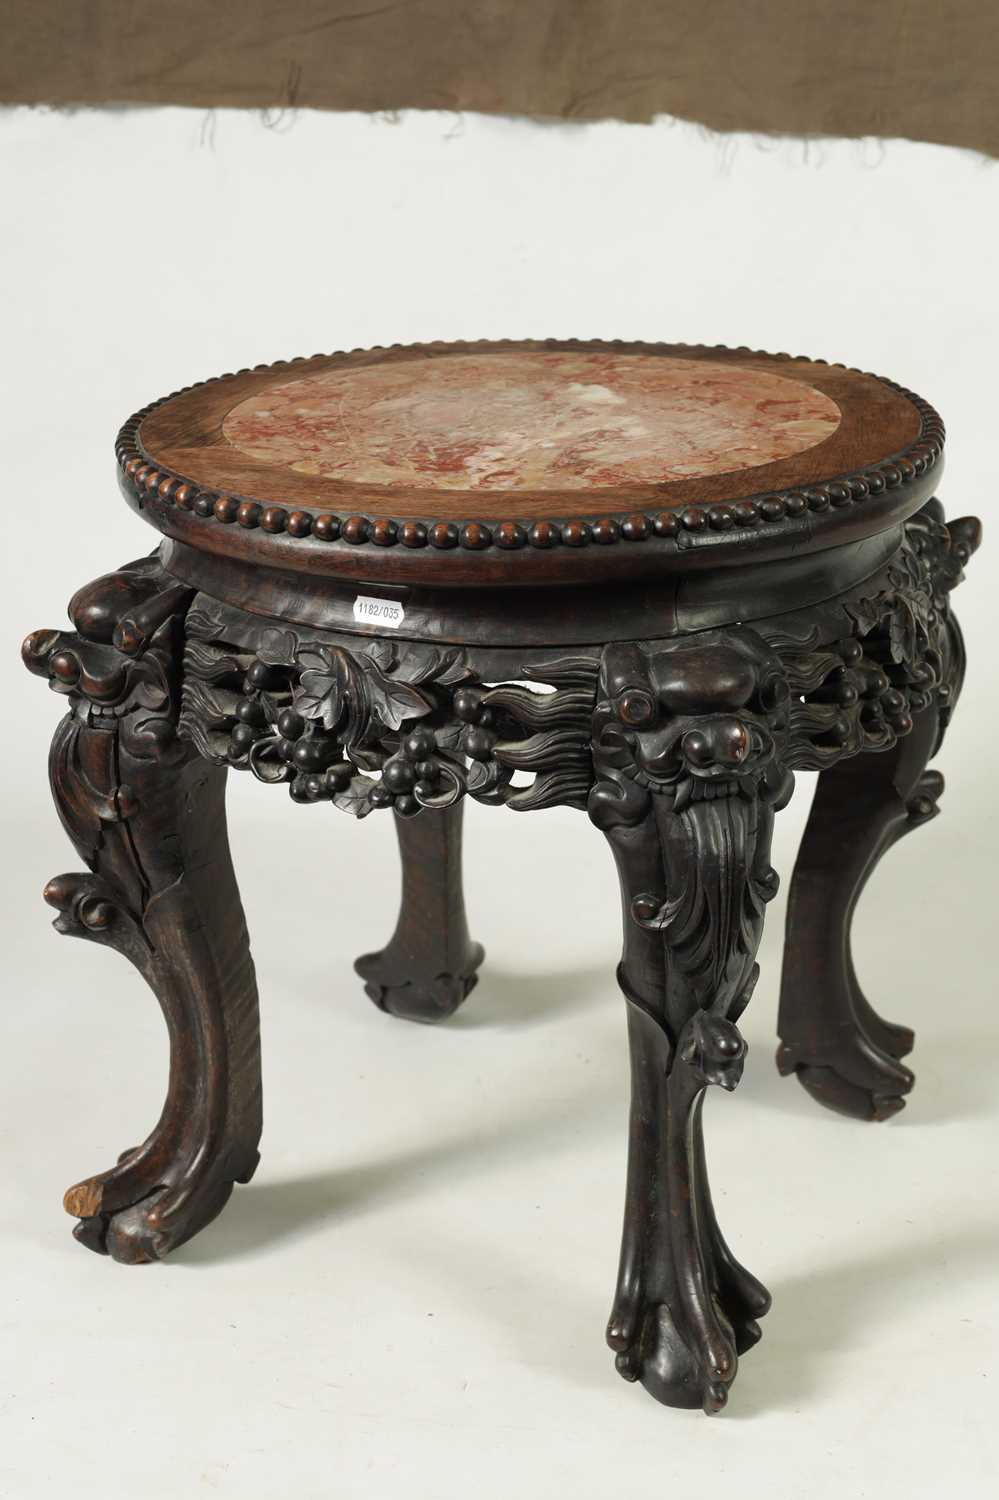 A 19TH CENTURY CHINESE HARDWOOD VASE STAND - Image 8 of 8